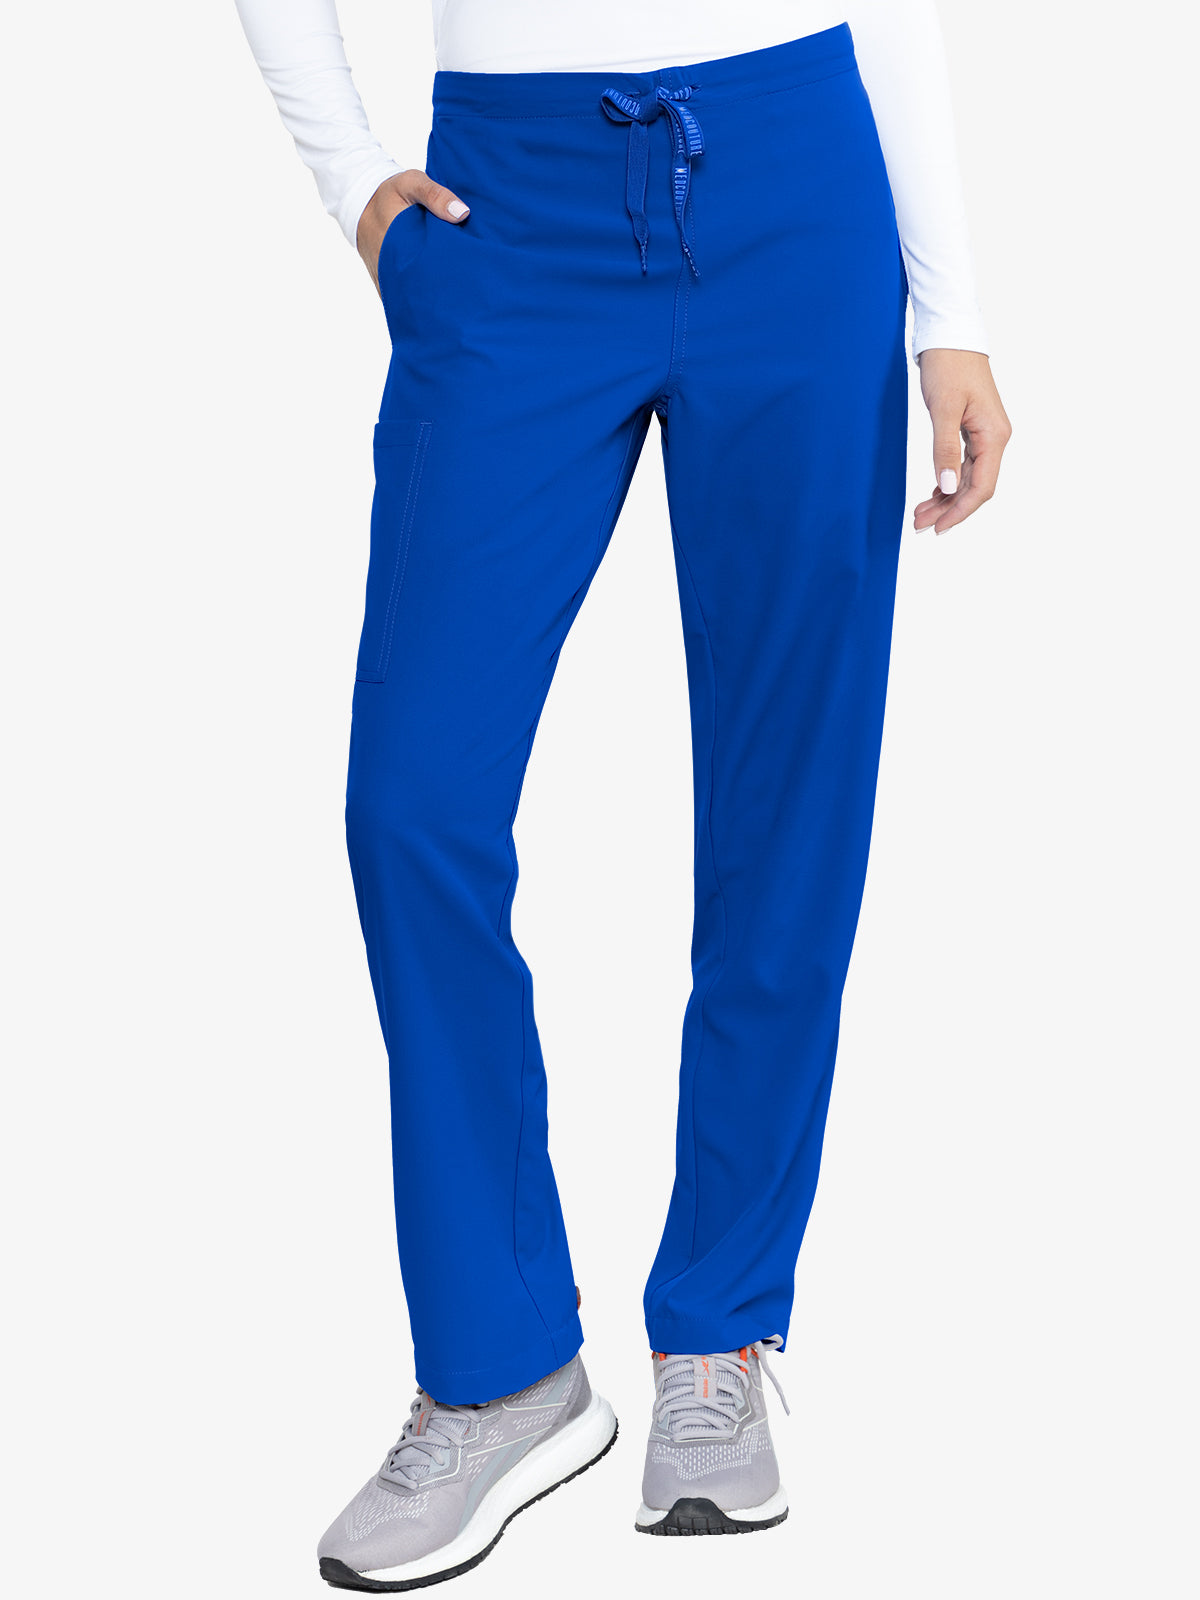 Med Couture Unisex Pant